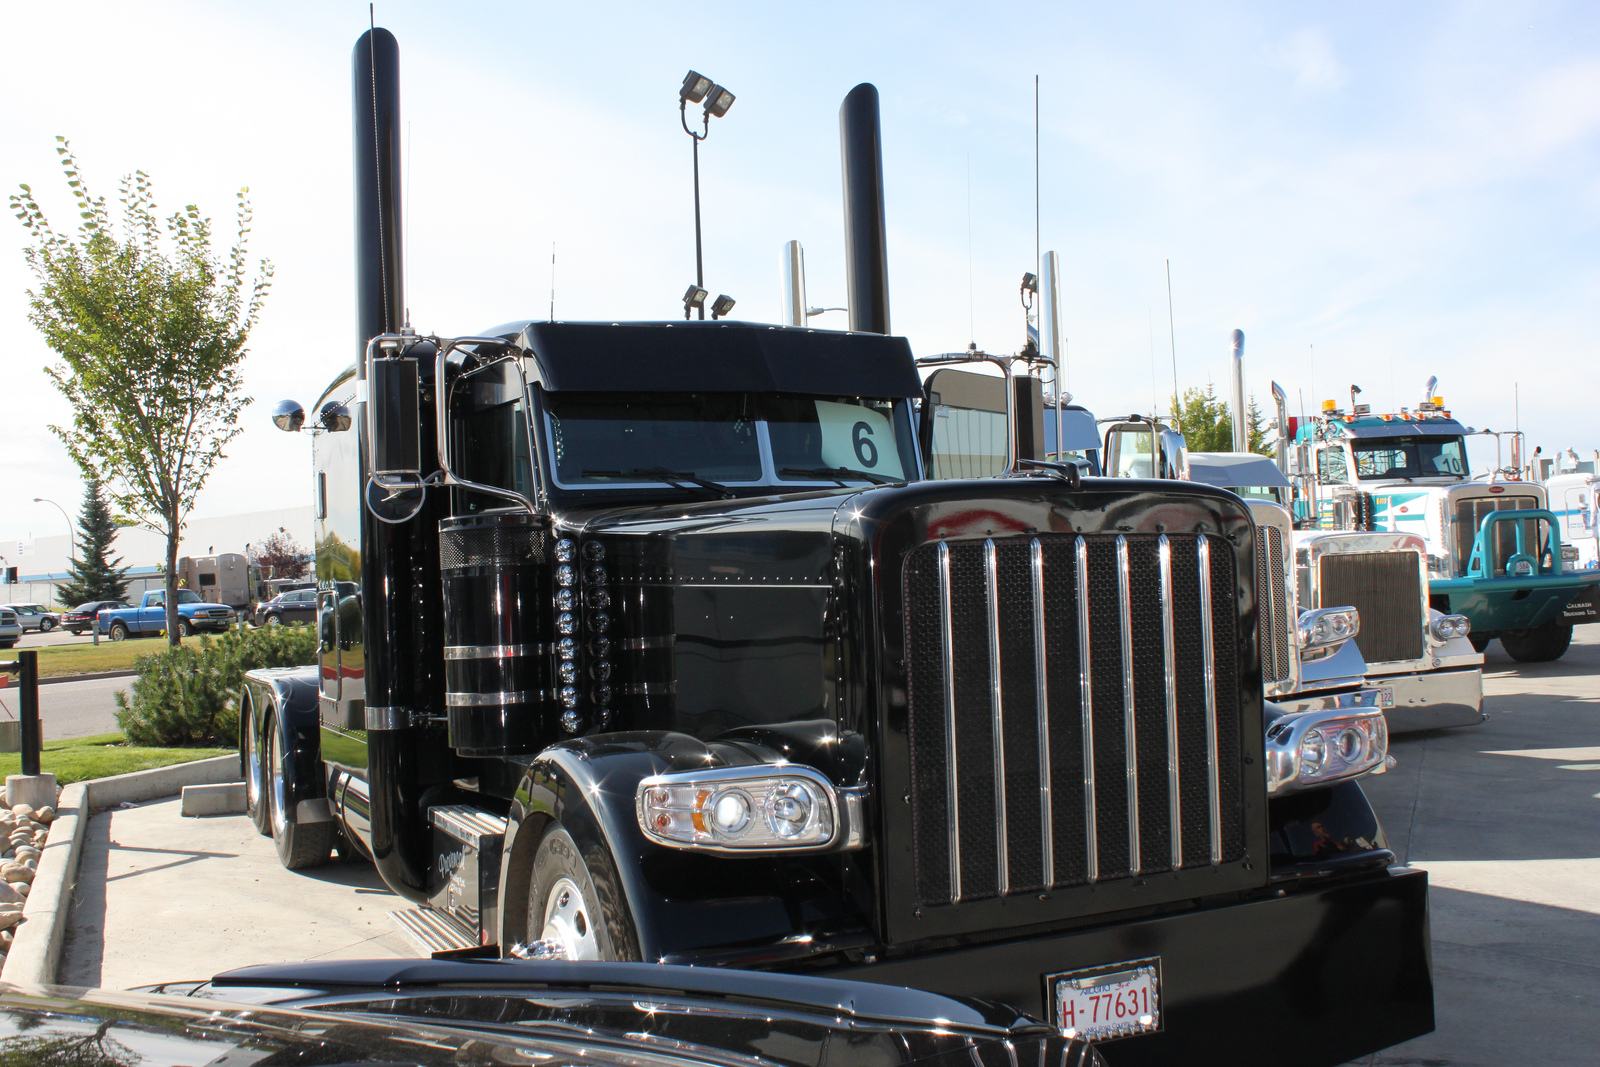 BLACKED OUT PETERBILT | Flickr - Photo Sharing!